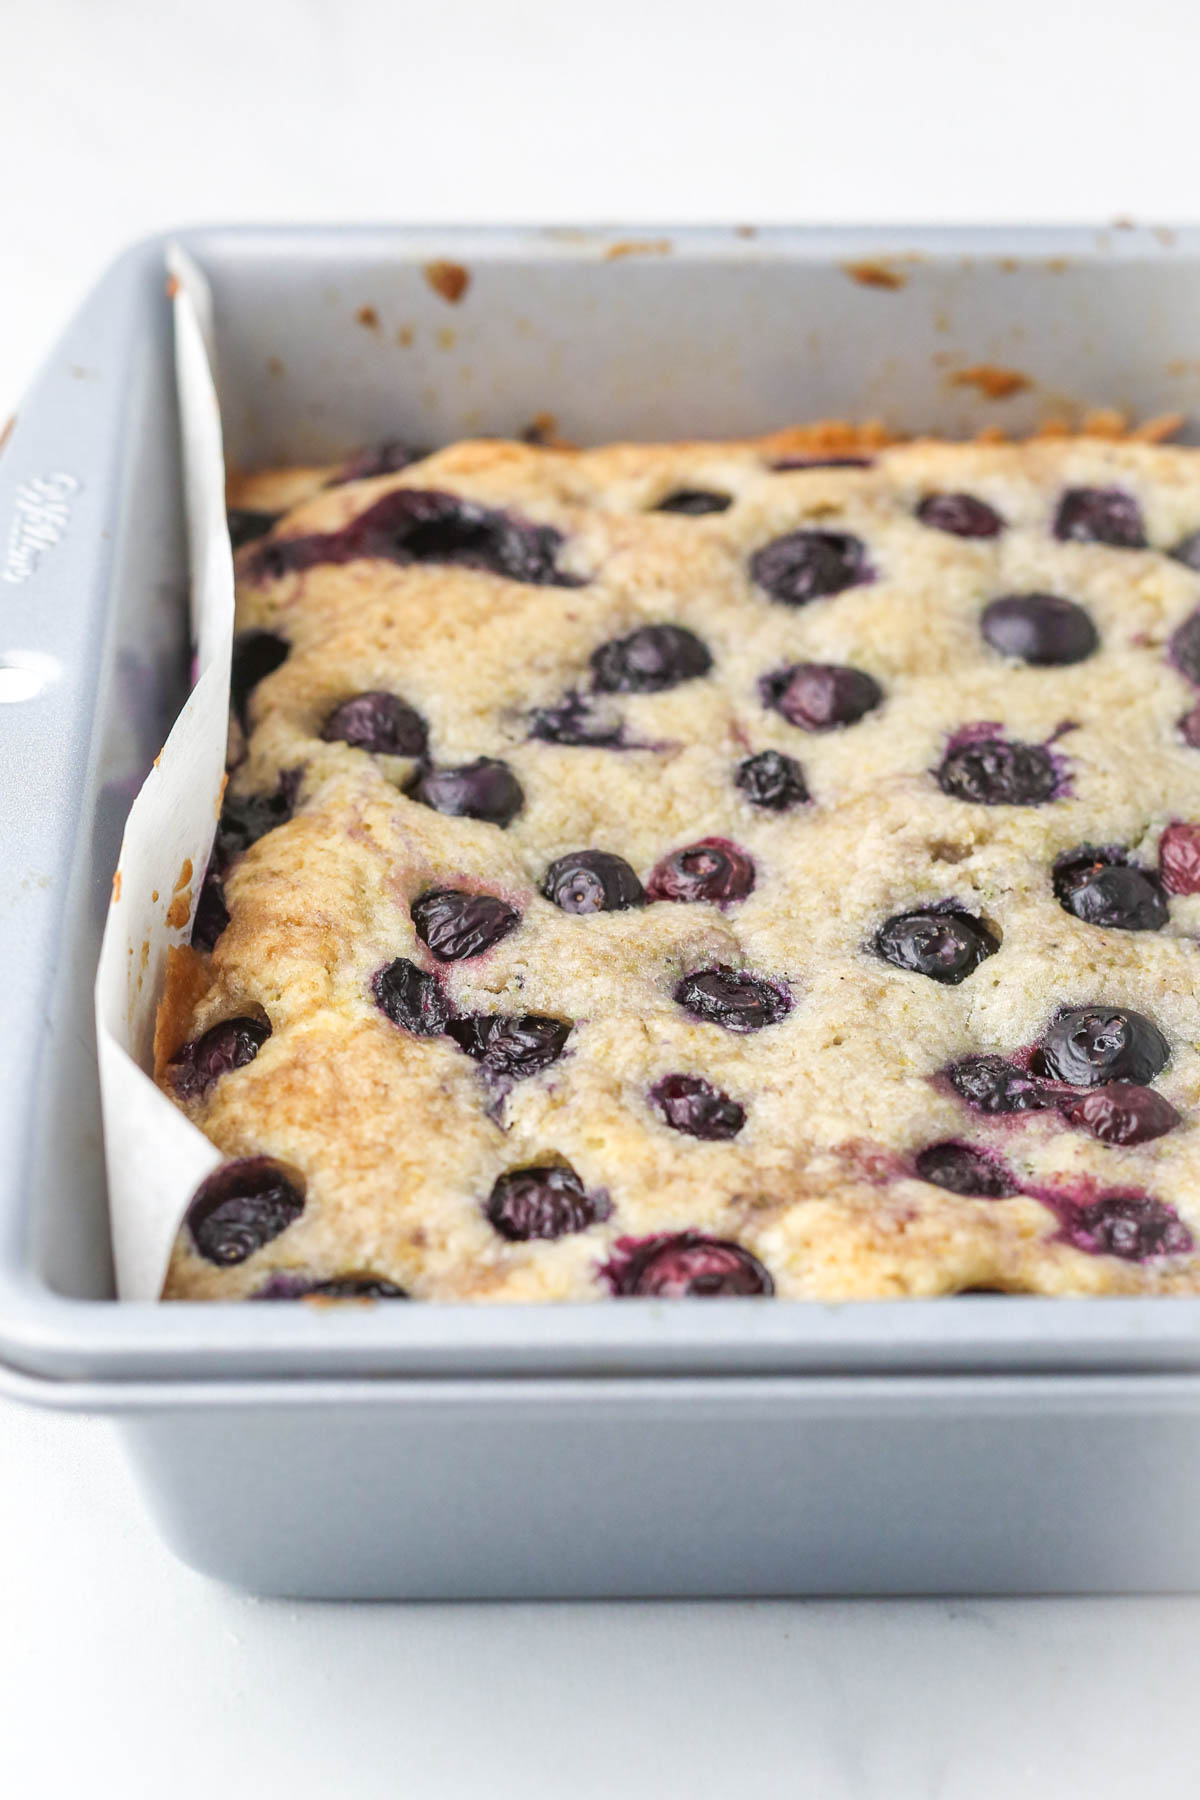 baked pan of lemon blueberry blondies, shown on an angle.